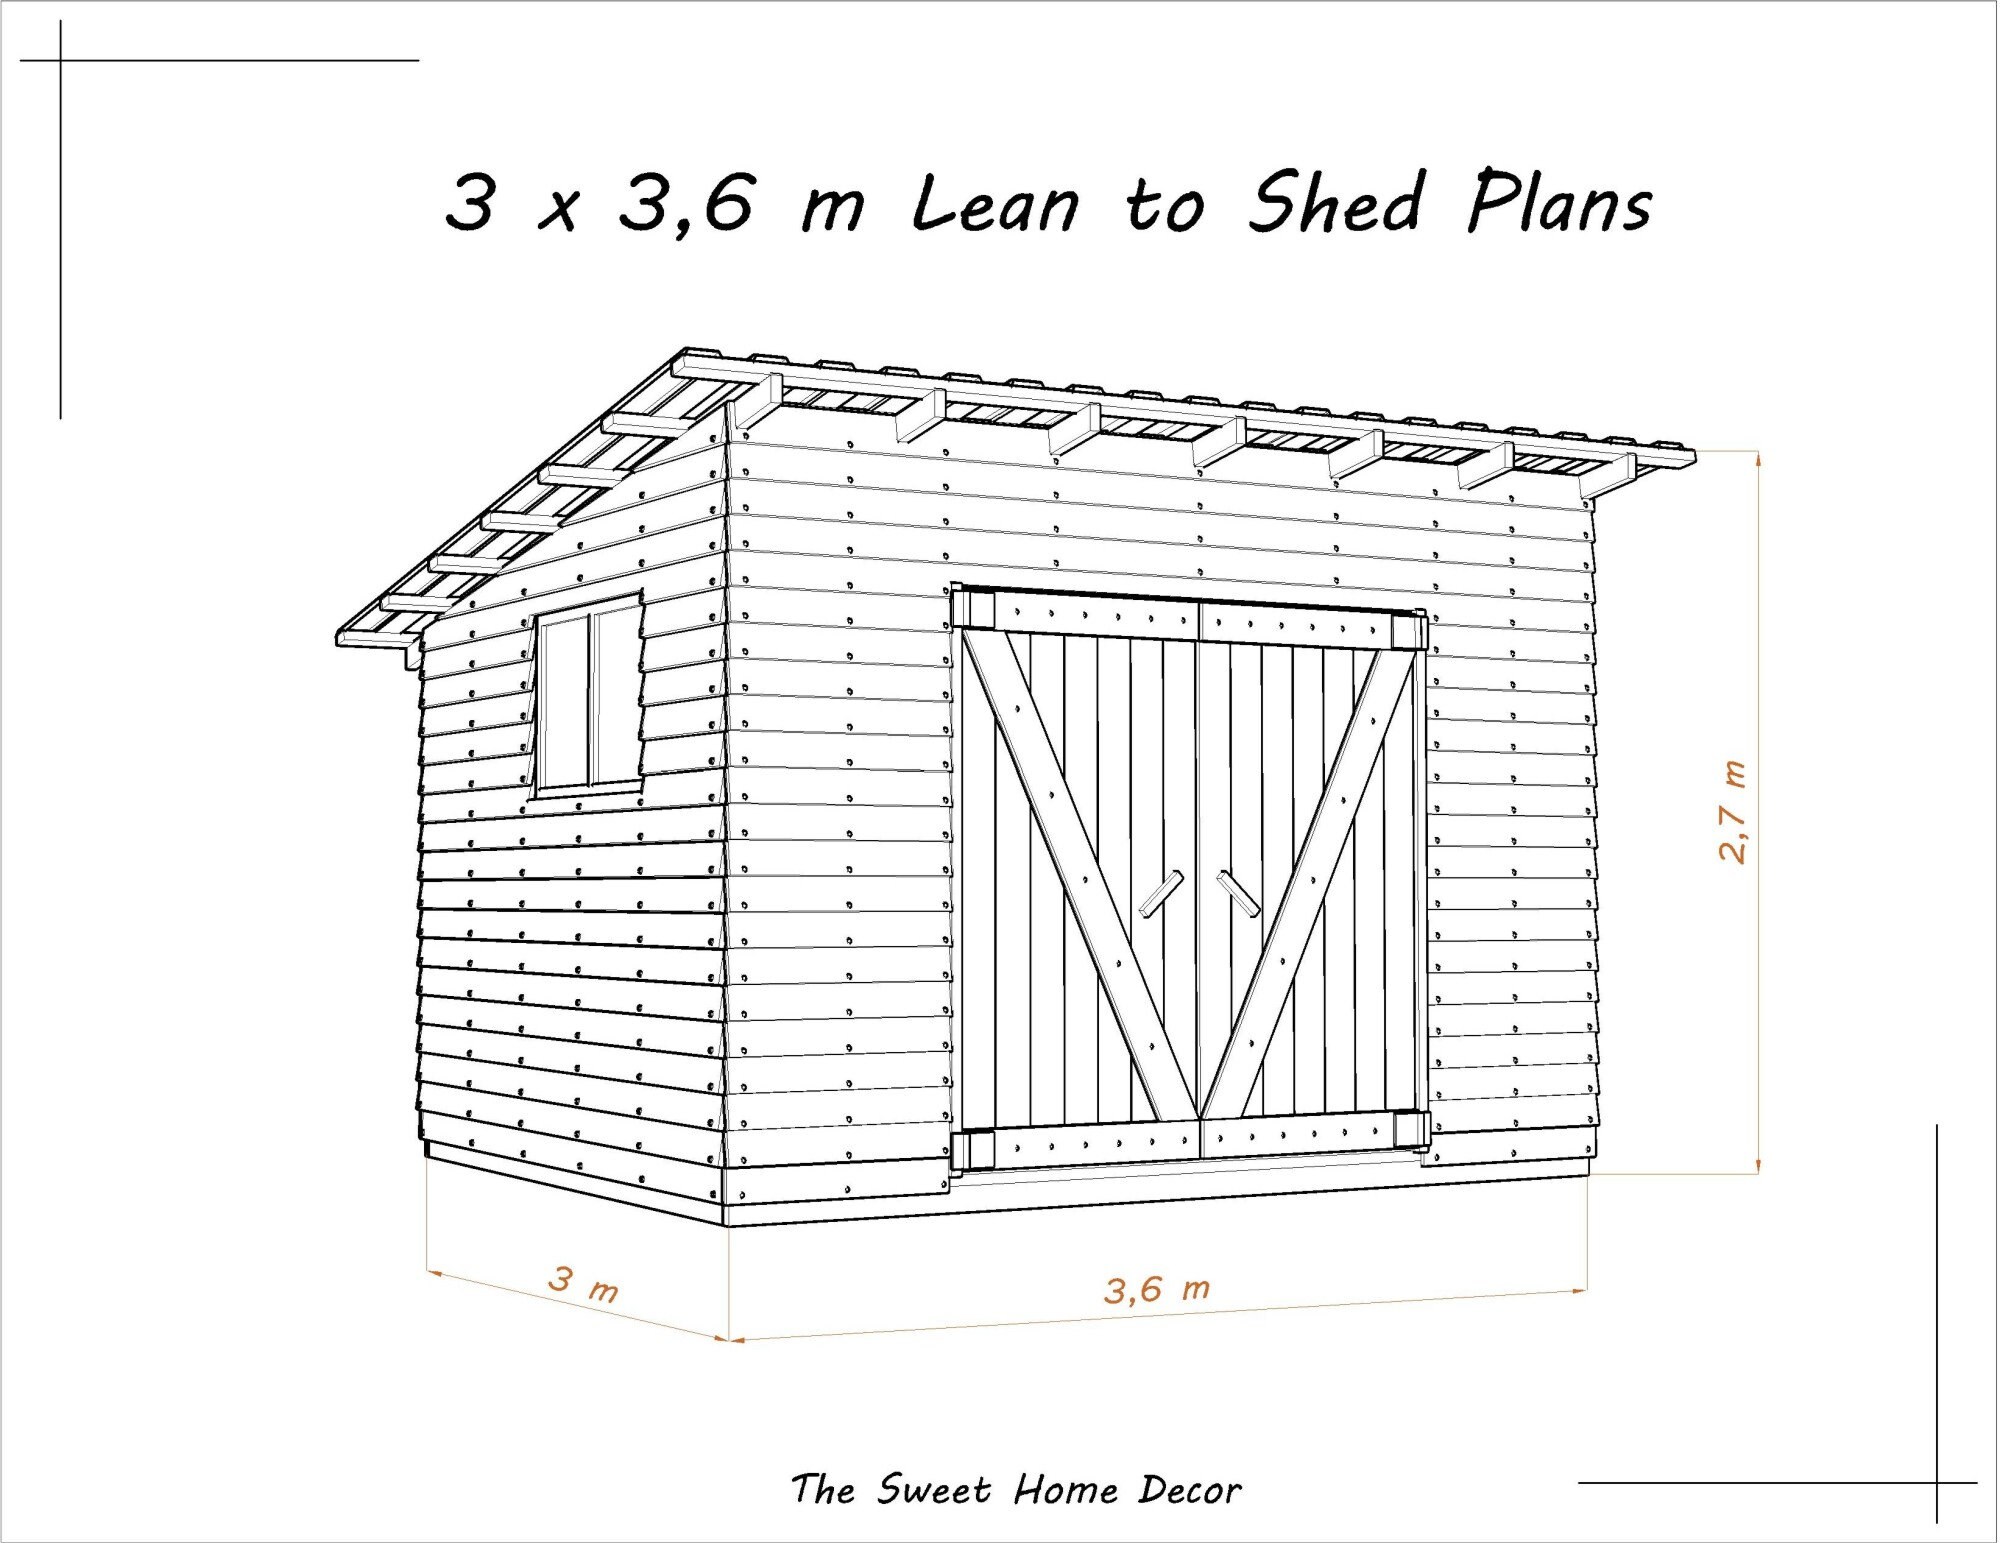 Diy 10x12 Lean to Shed Plans. Diy garden shed plans in pdf